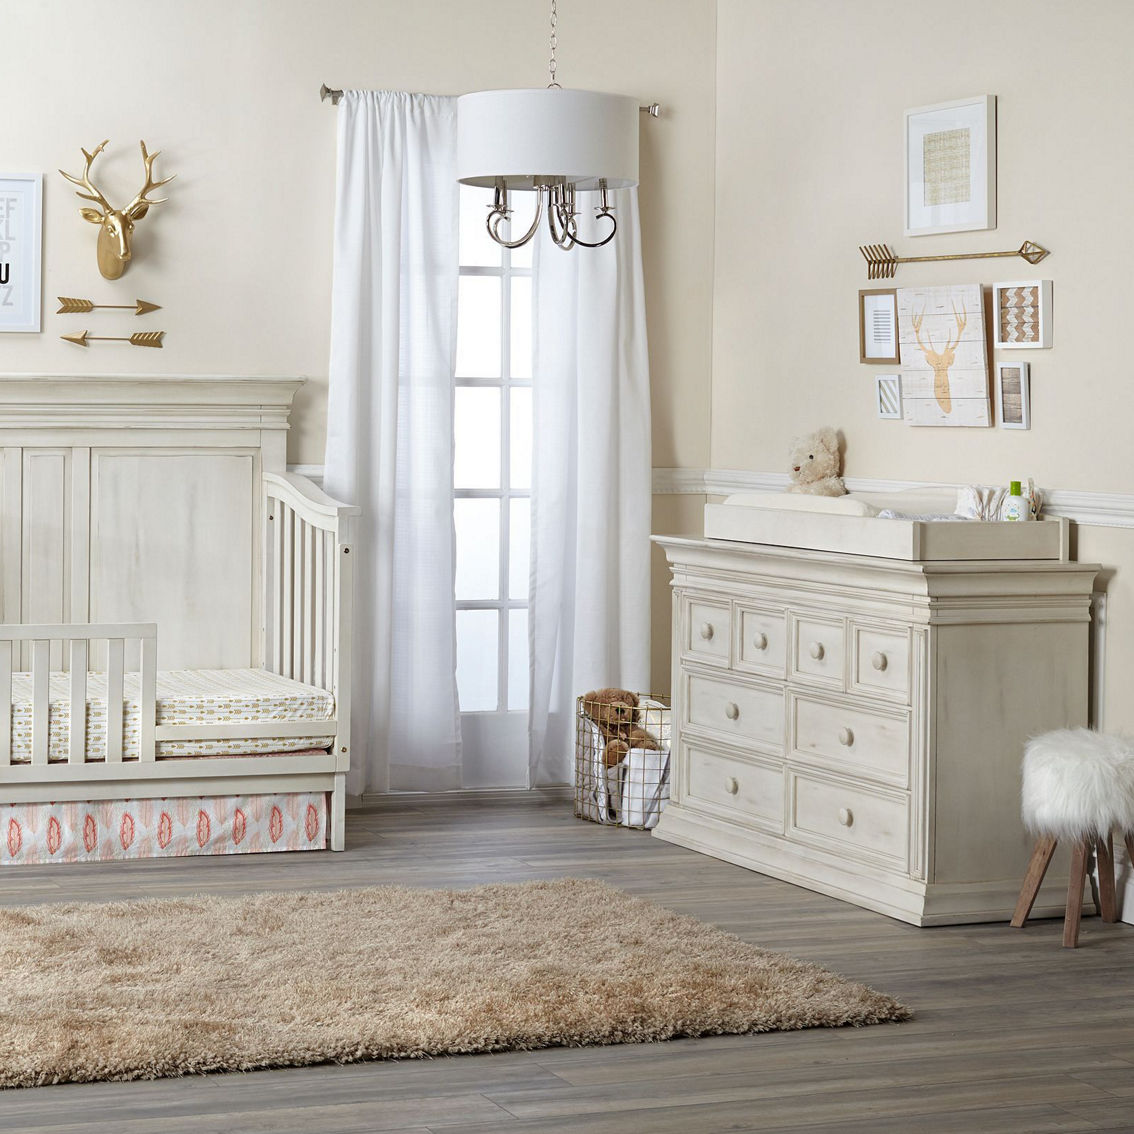 Baby Cache Vienna Changing Topper Antique White - Image 5 of 5